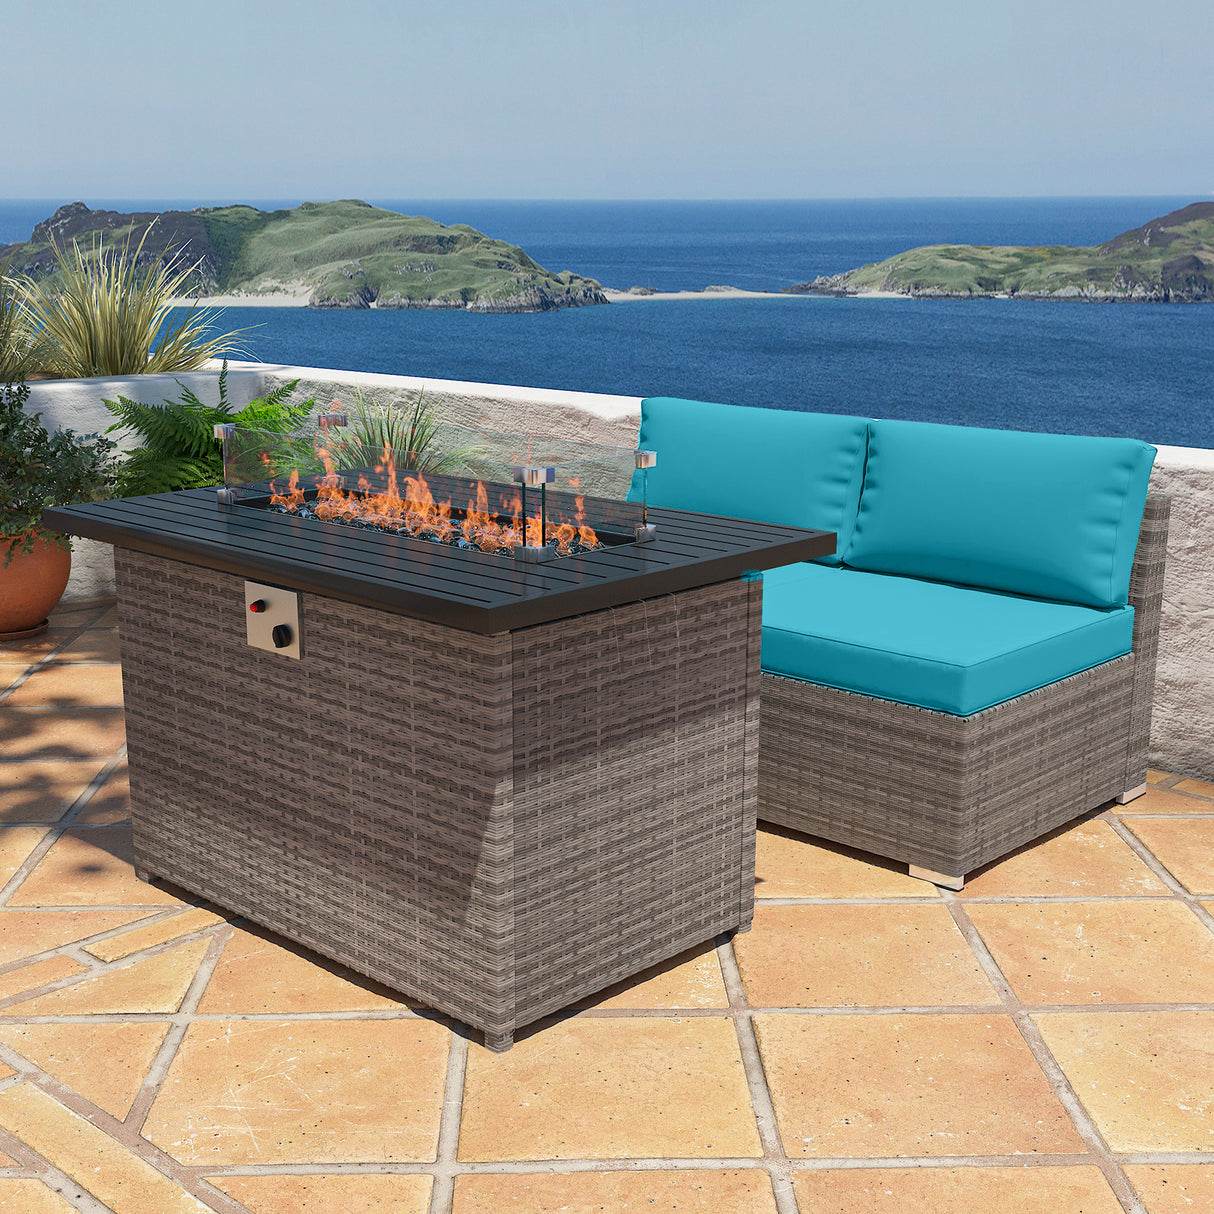 EAGLE PEAK 3 Piece Outdoor Armless Wicker Sofa Set, Outdoor Patio Armless Chairs with Removable Cushions and Fire Table, Sectional Wicker Loveseat Sofa